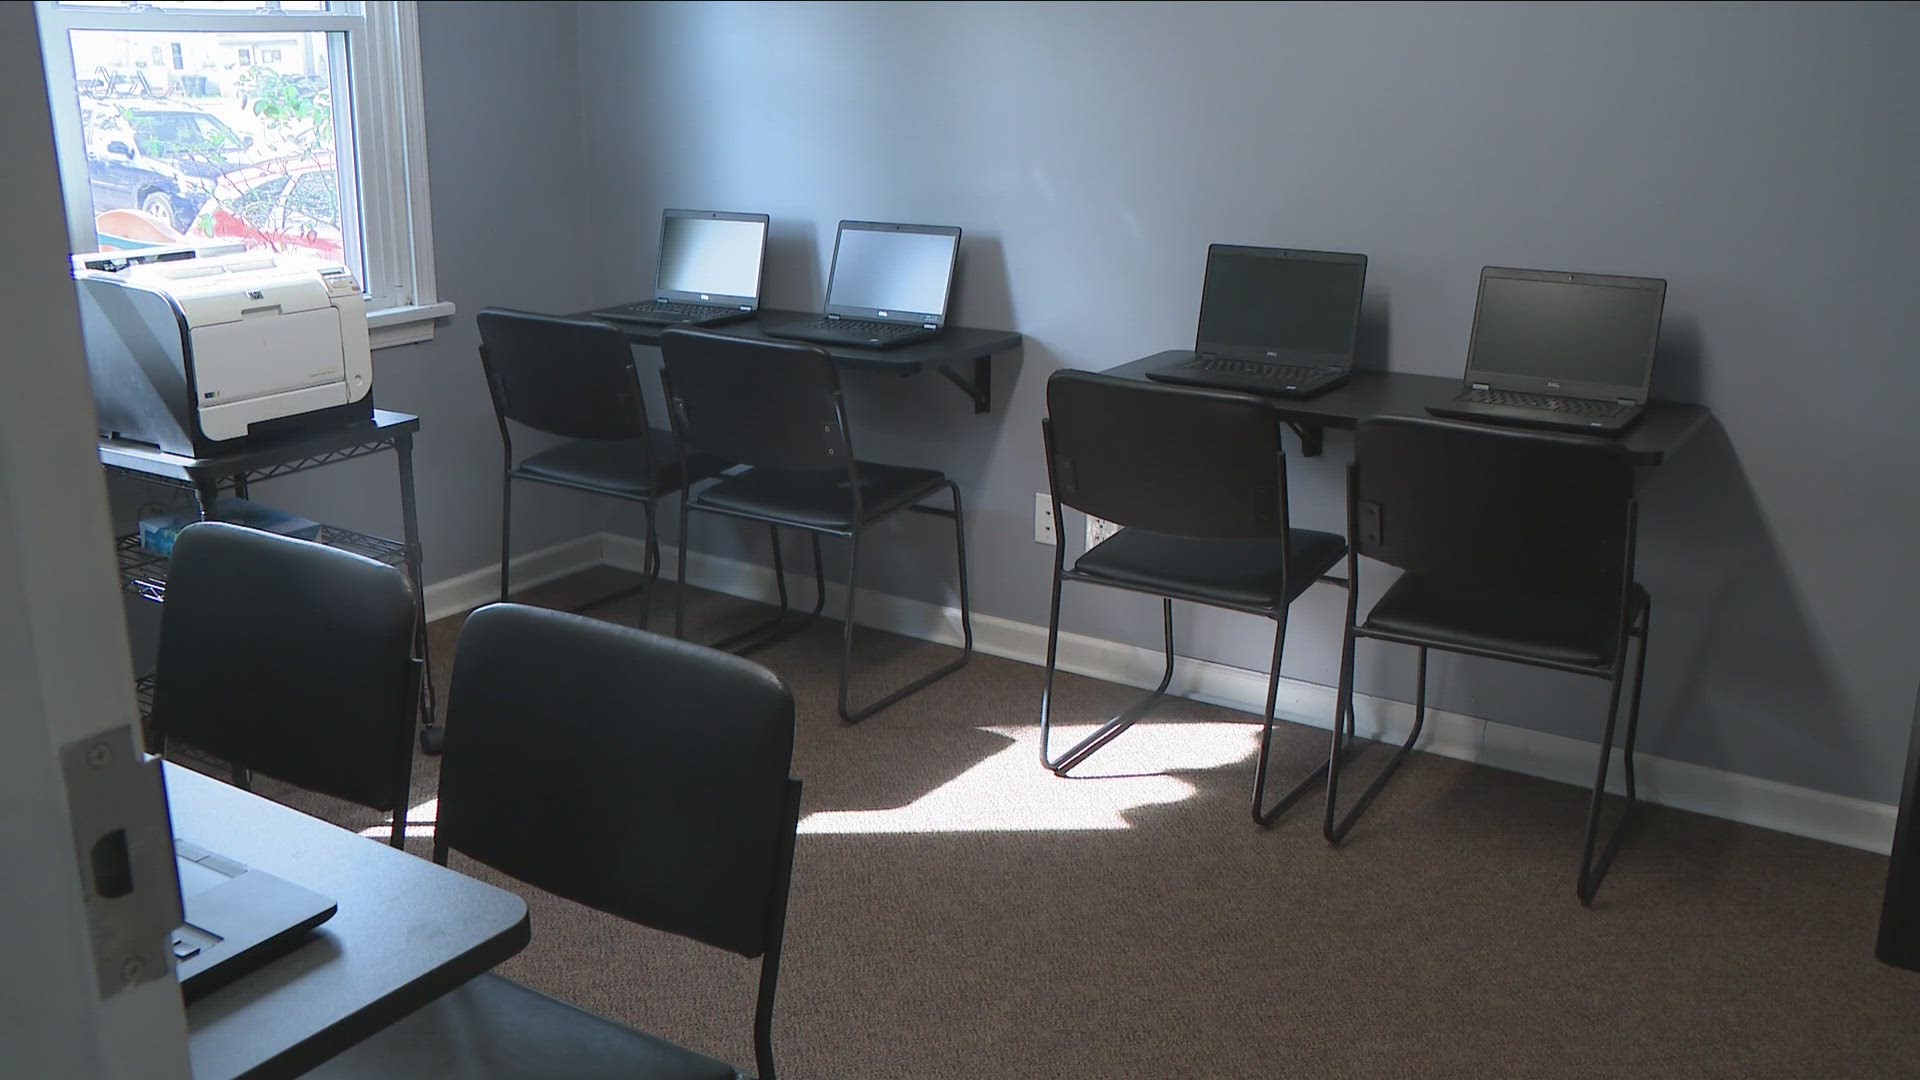 A new computer lab will allow neighbors without internet or a computer to apply for services they may need.